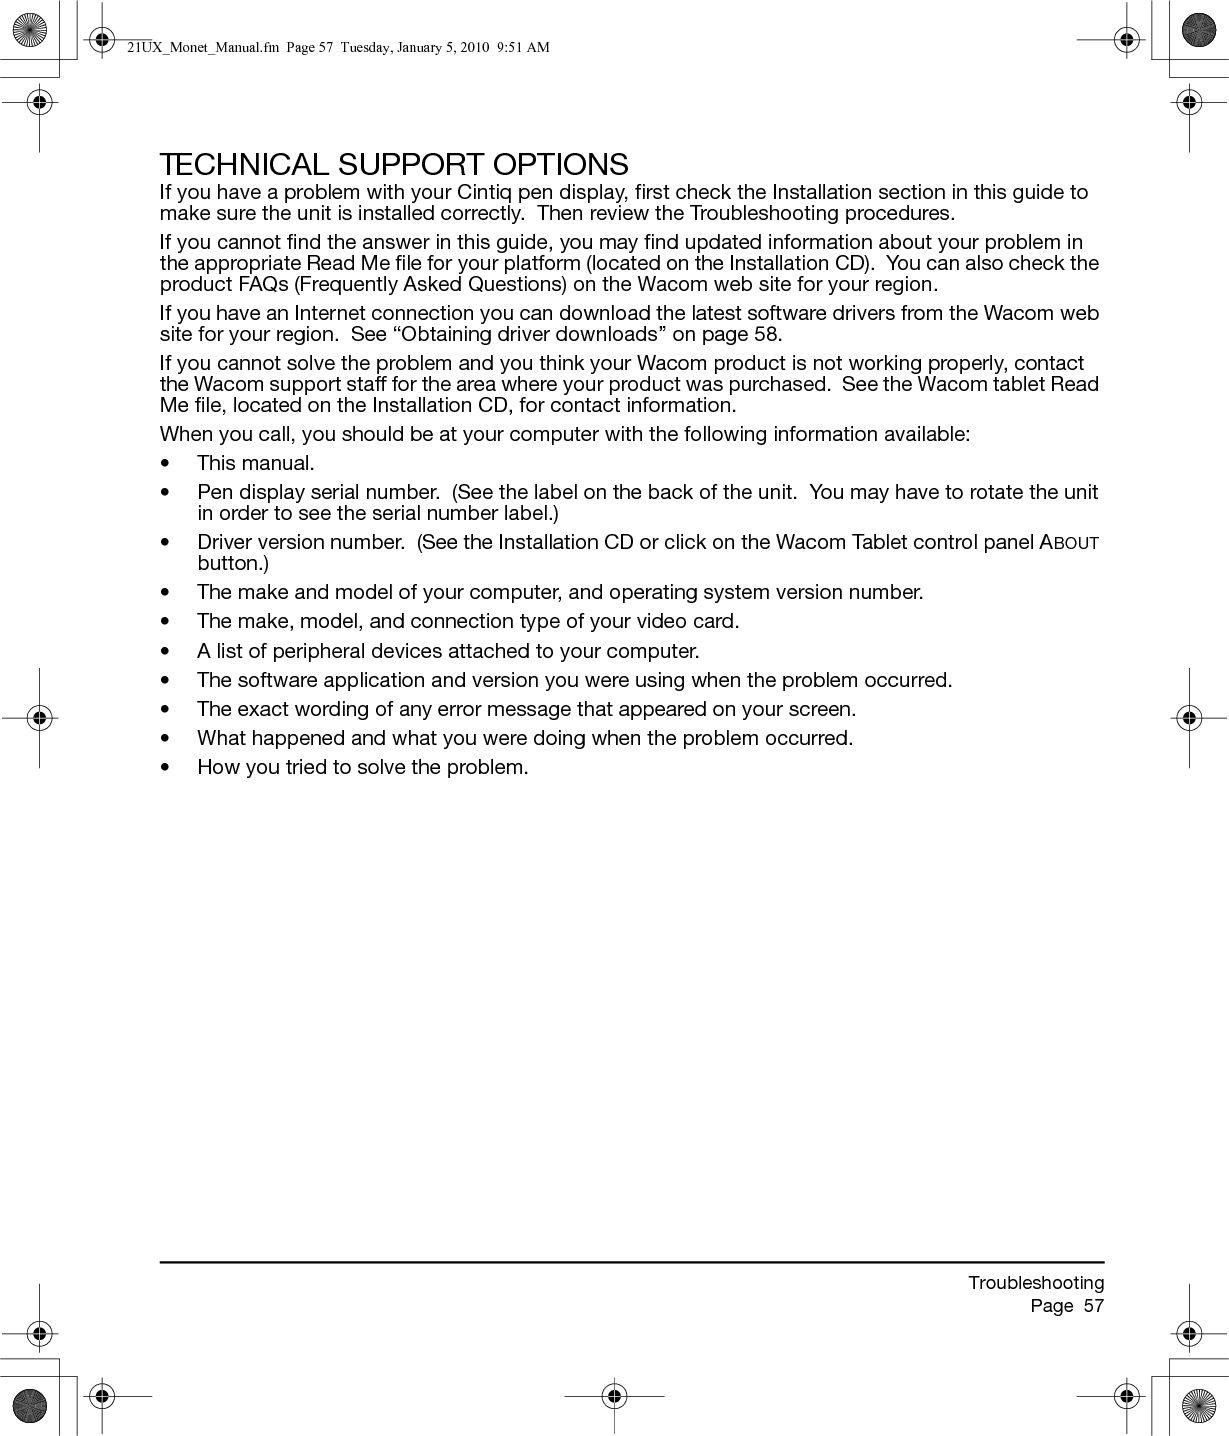 TroubleshootingPage  57TECHNICAL SUPPORT OPTIONSIf you have a problem with your Cintiq pen display, first check the Installation section in this guide to make sure the unit is installed correctly.  Then review the Troubleshooting procedures.If you cannot find the answer in this guide, you may find updated information about your problem in the appropriate Read Me file for your platform (located on the Installation CD).  You can also check the product FAQs (Frequently Asked Questions) on the Wacom web site for your region.If you have an Internet connection you can download the latest software drivers from the Wacom web site for your region.  See “Obtaining driver downloads” on page 58.If you cannot solve the problem and you think your Wacom product is not working properly, contact the Wacom support staff for the area where your product was purchased.  See the Wacom tablet Read Me file, located on the Installation CD, for contact information.When you call, you should be at your computer with the following information available:• This manual.• Pen display serial number.  (See the label on the back of the unit.  You may have to rotate the unit in order to see the serial number label.)• Driver version number.  (See the Installation CD or click on the Wacom Tablet control panel ABOUT button.)• The make and model of your computer, and operating system version number.• The make, model, and connection type of your video card.• A list of peripheral devices attached to your computer.• The software application and version you were using when the problem occurred.• The exact wording of any error message that appeared on your screen.• What happened and what you were doing when the problem occurred.• How you tried to solve the problem.21UX_Monet_Manual.fm  Page 57  Tuesday, January 5, 2010  9:51 AM